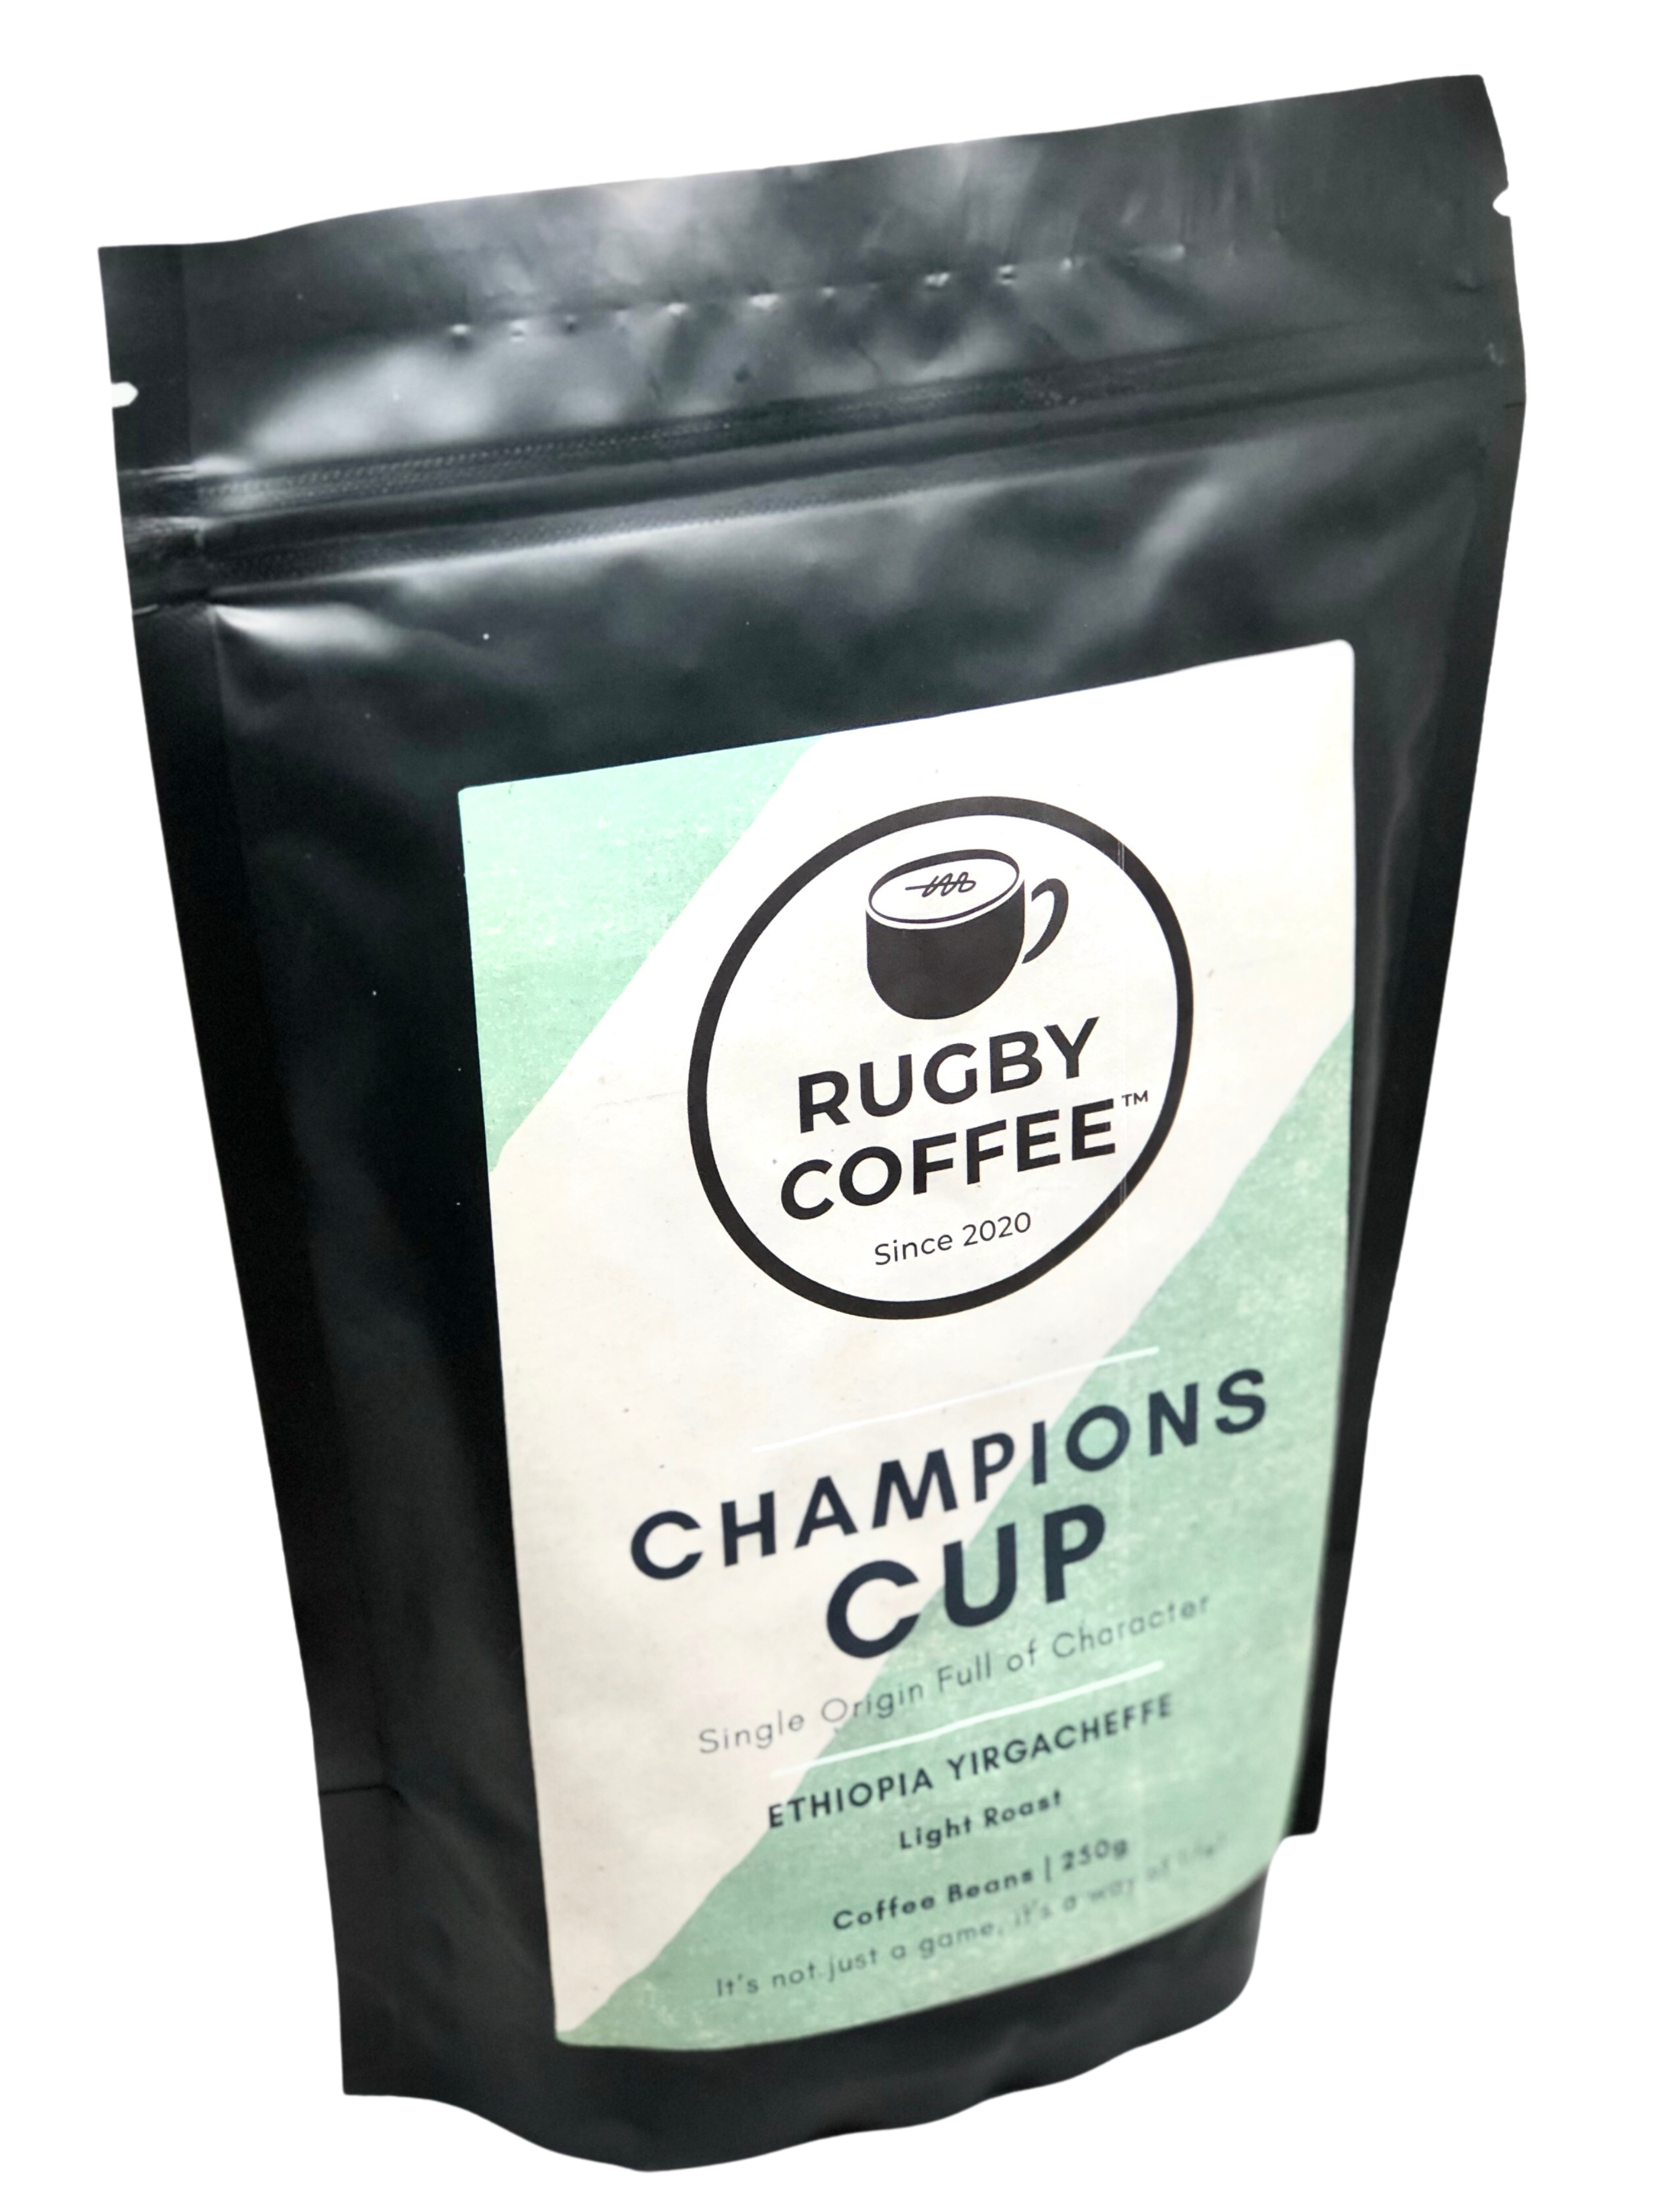 CHAMPIONS CUP 250g Coffee Beans